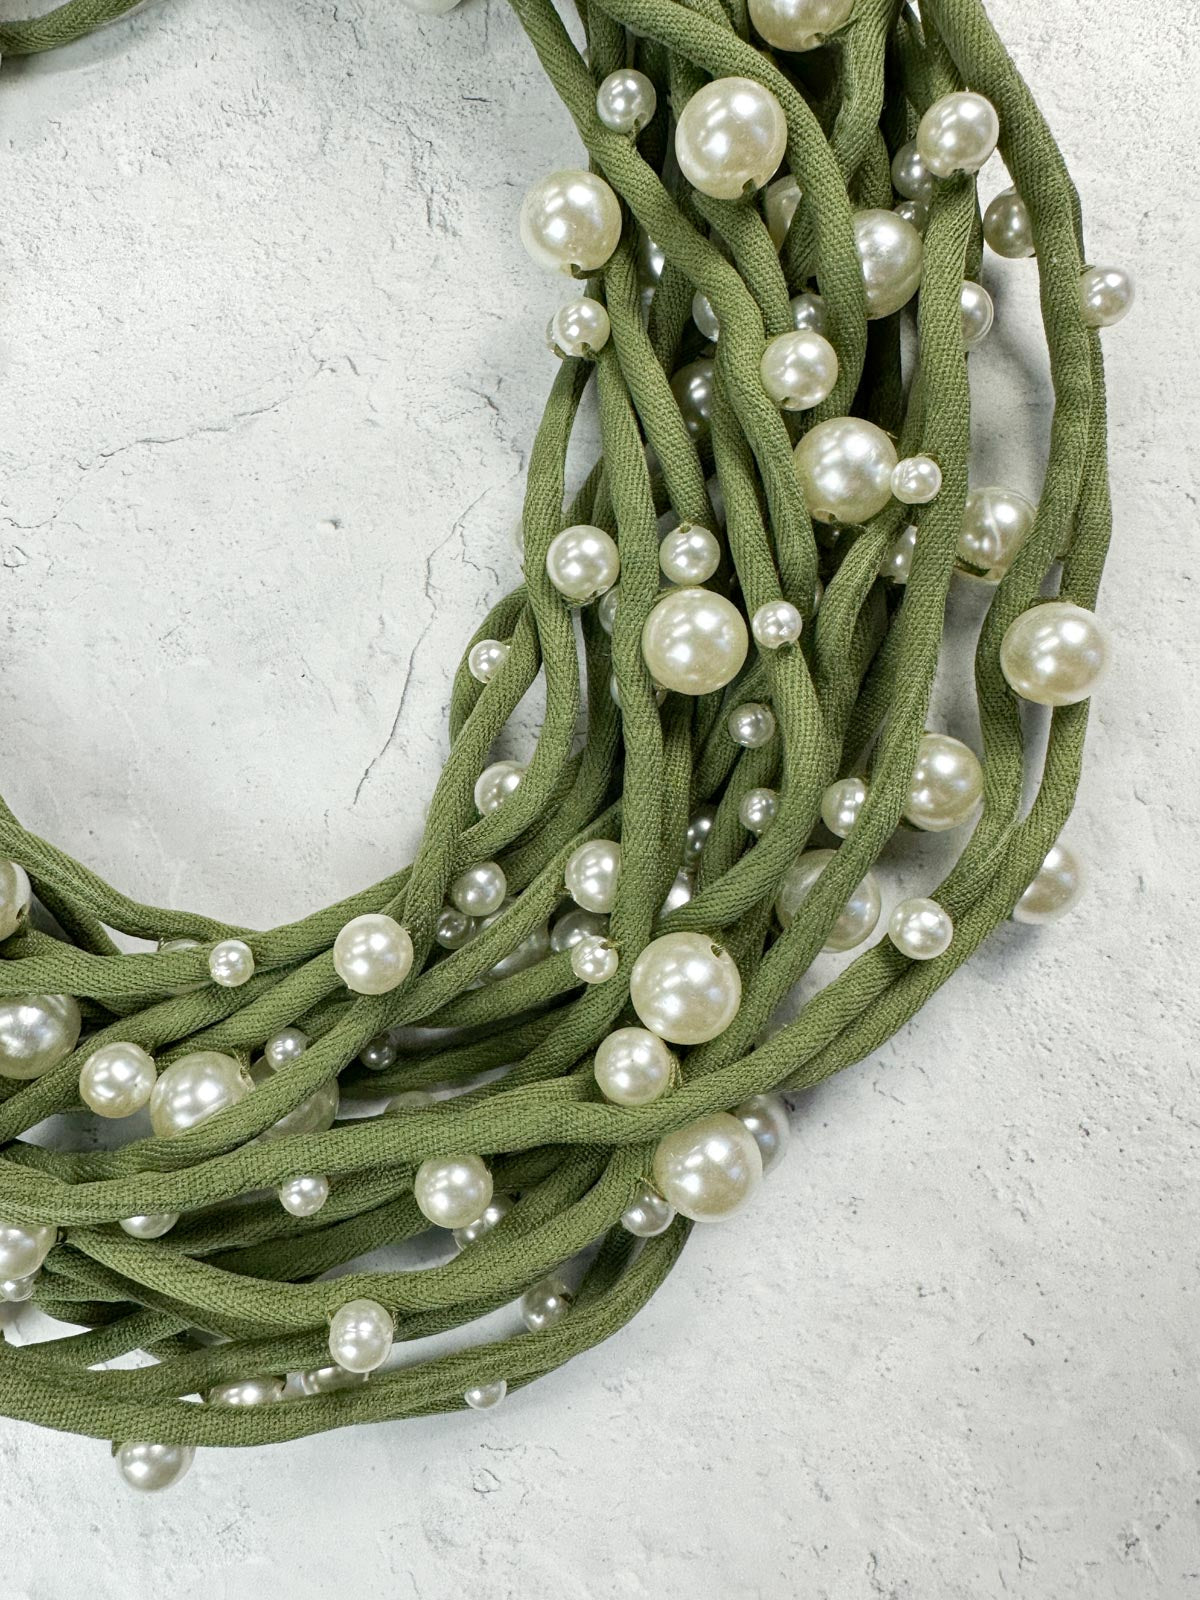 Jianhui London 10 Strand Mixed Small Pearls on Cord Necklace, White/Green - Statement Boutique